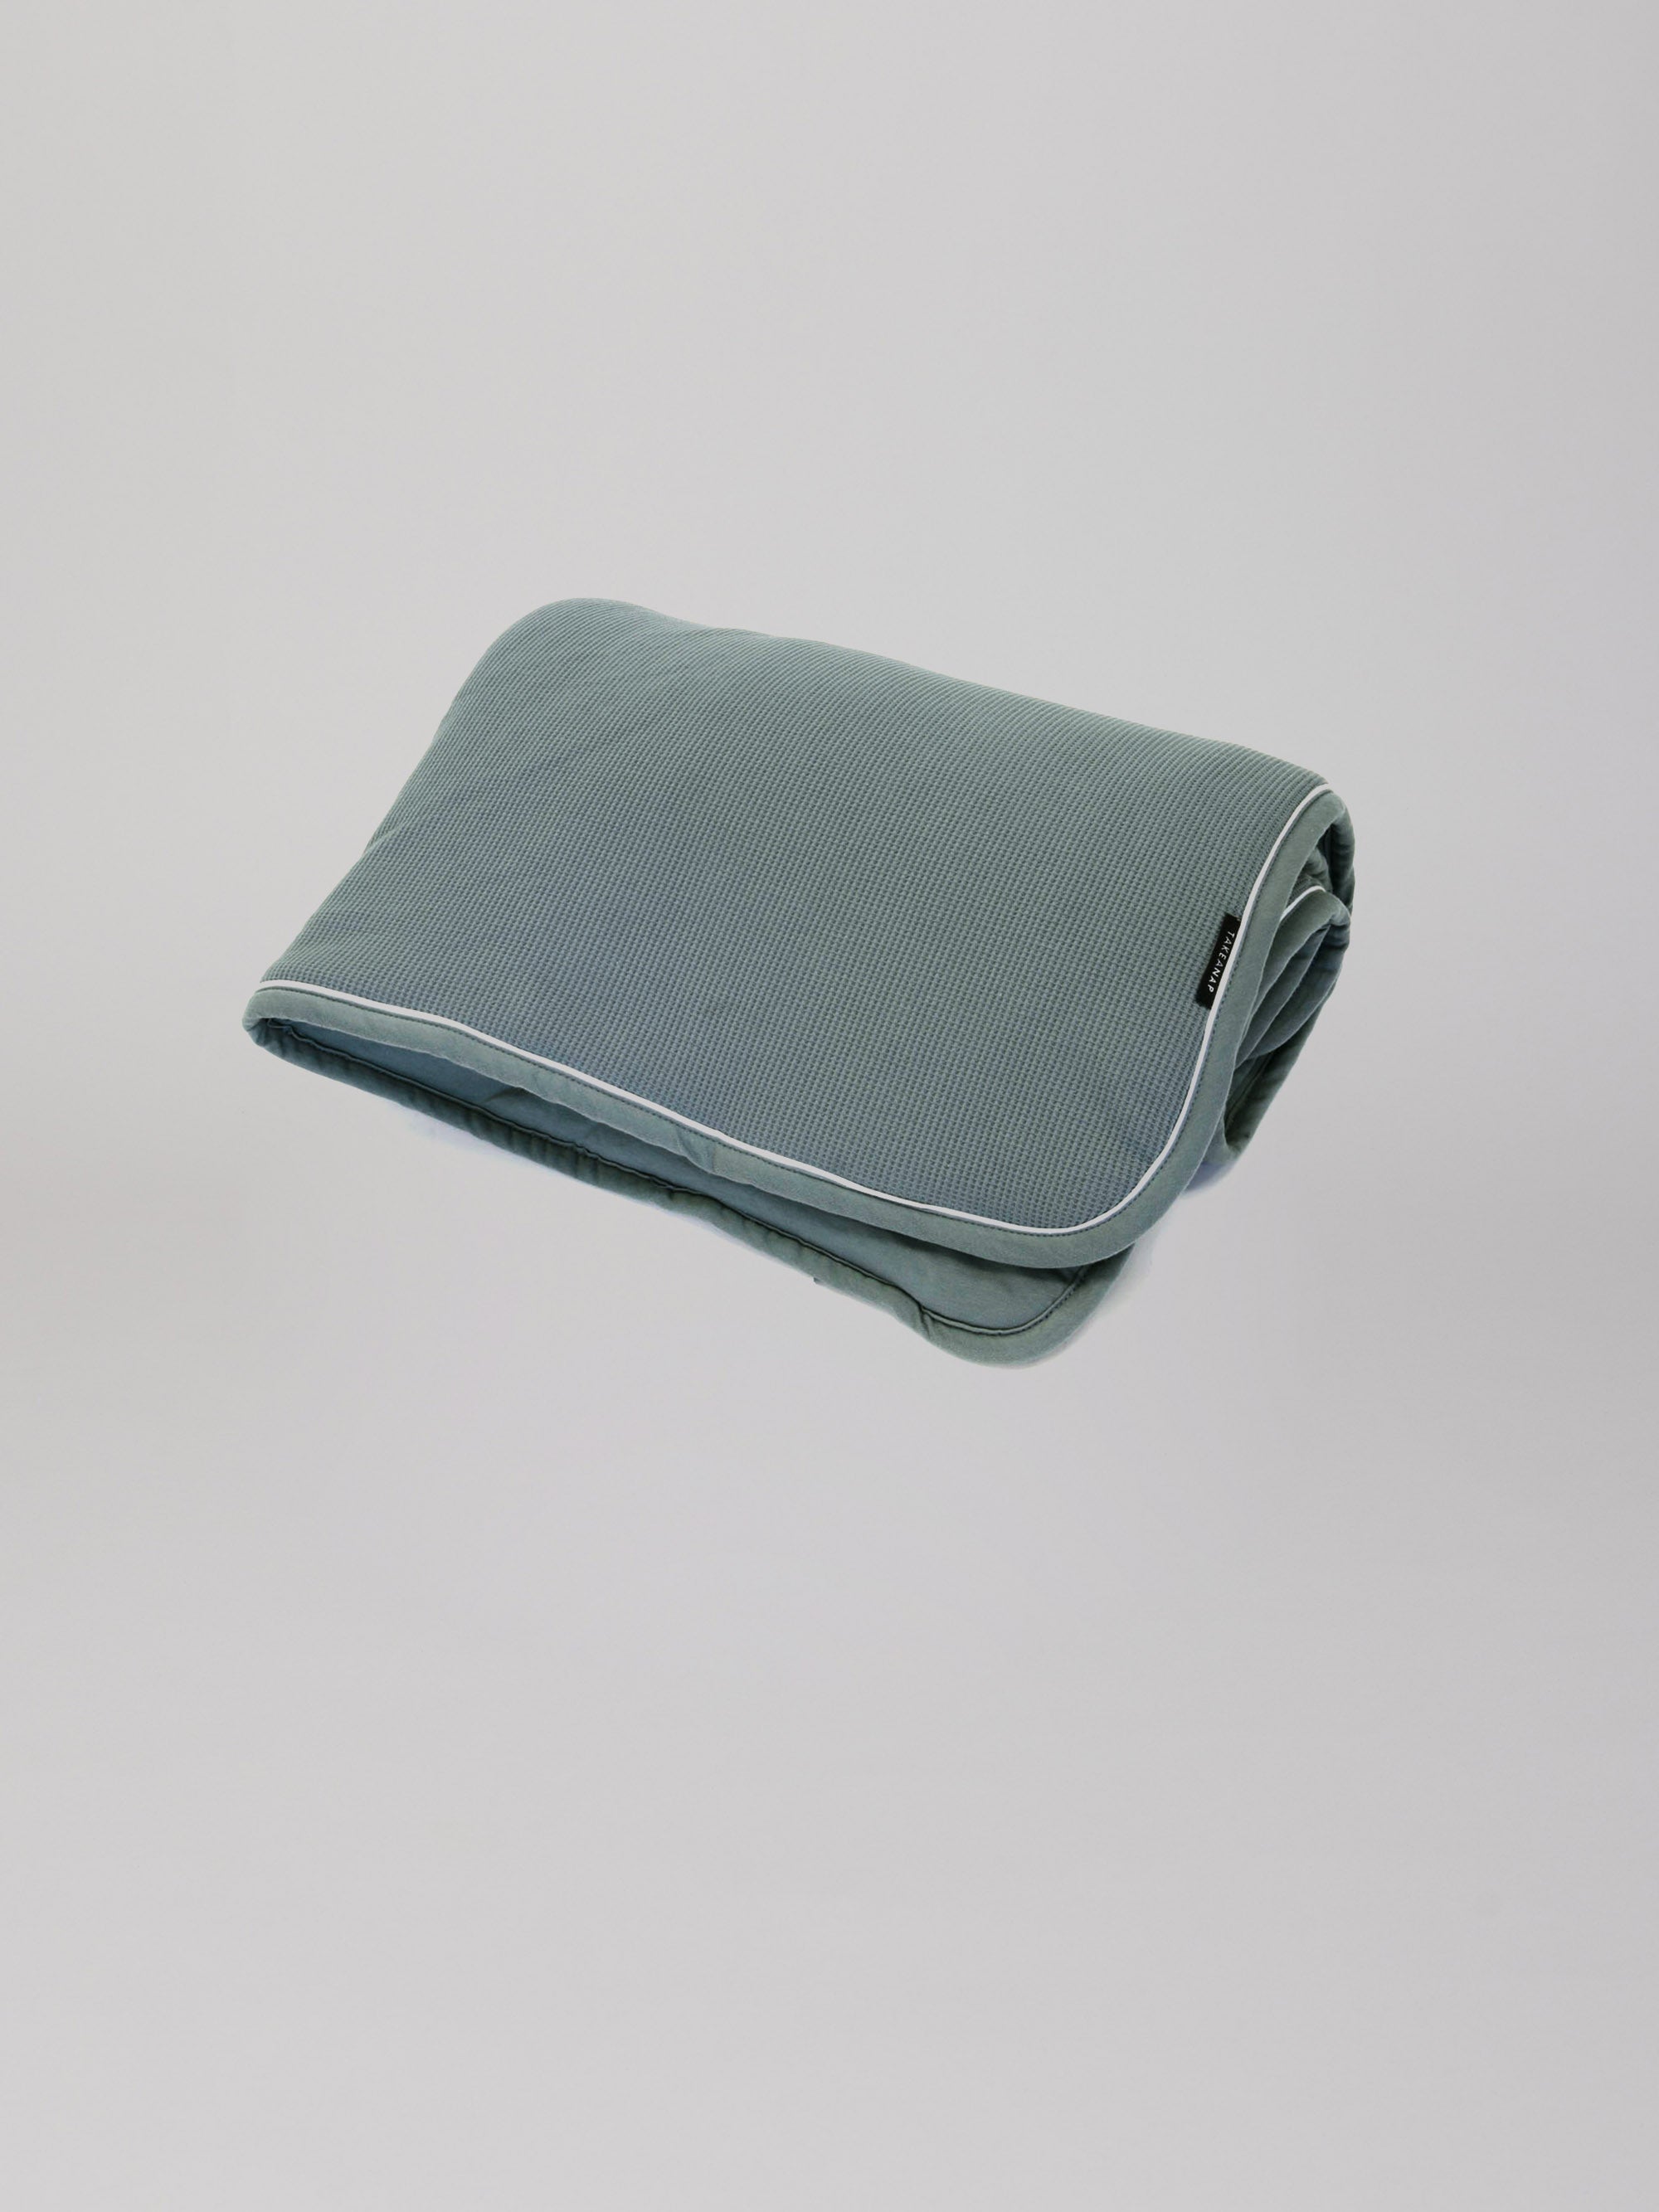 Hey welcome 2 Jersey Blanket SOFT 120 | JACQUARD product page. Image: Jersey Blanket in color on a grey background